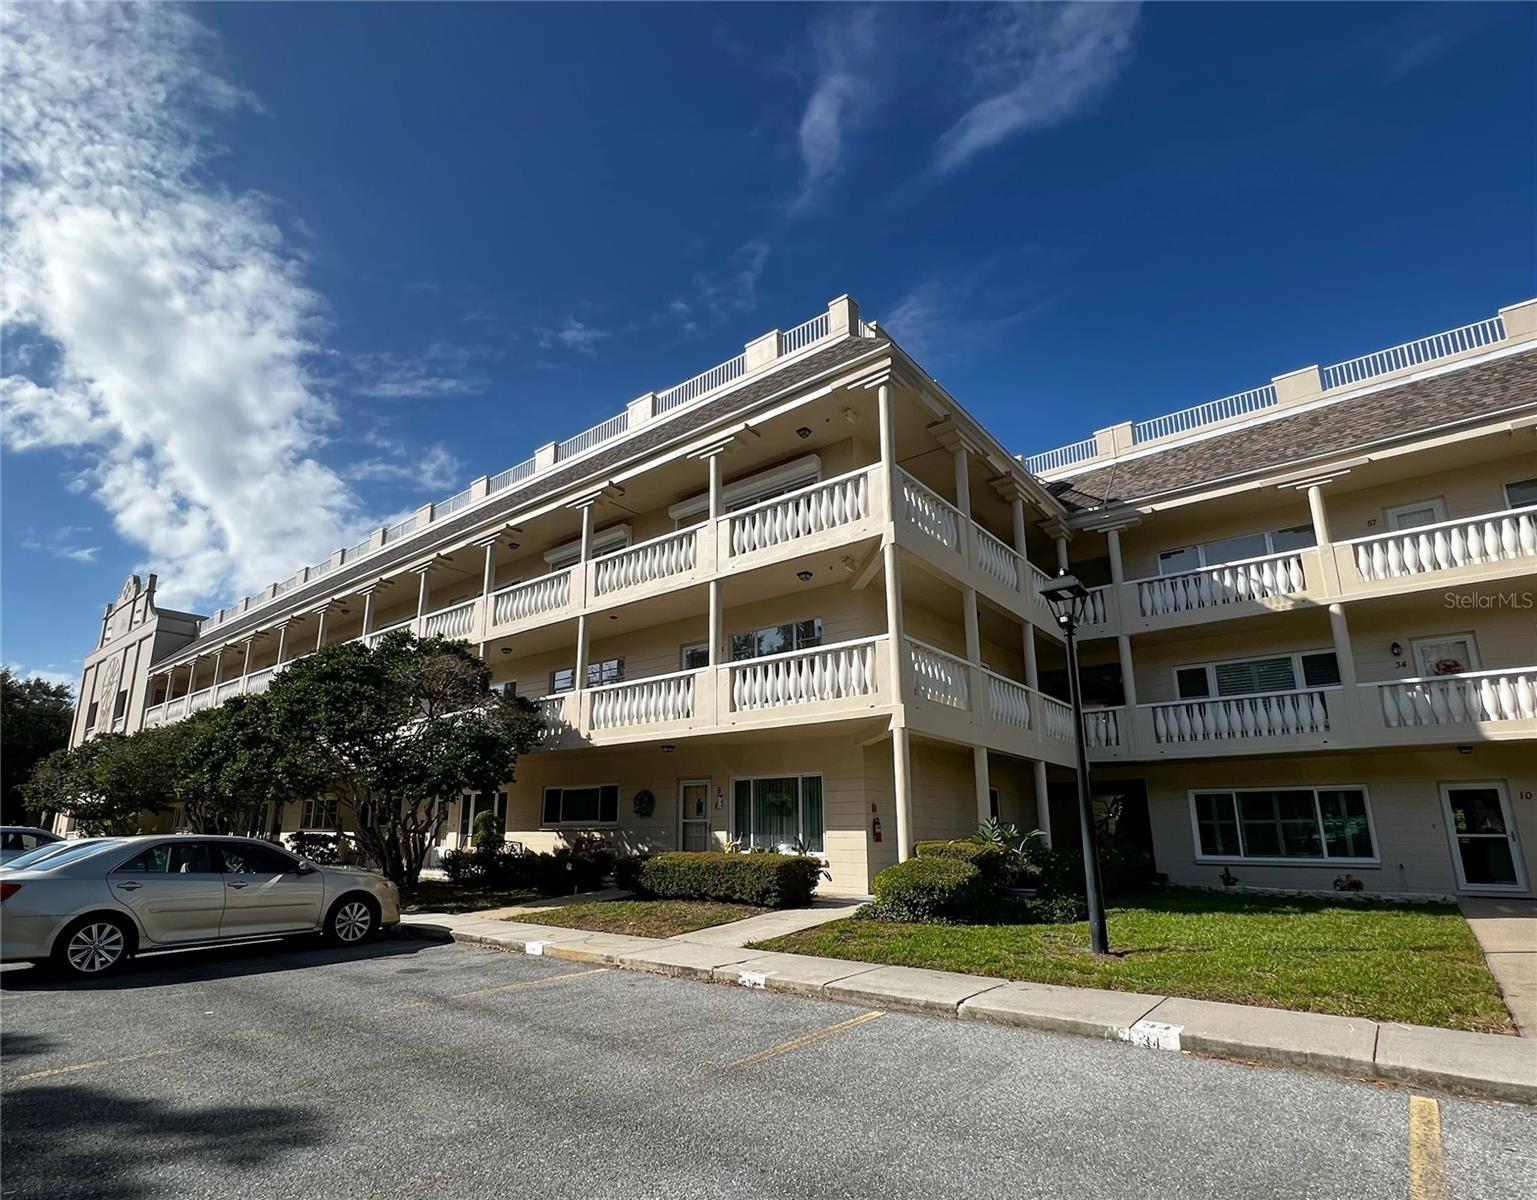 For sale: 2170 AMERICUS BOULEVARD S # 31, CLEARWATER FL 33763, CLEARWATER, FL